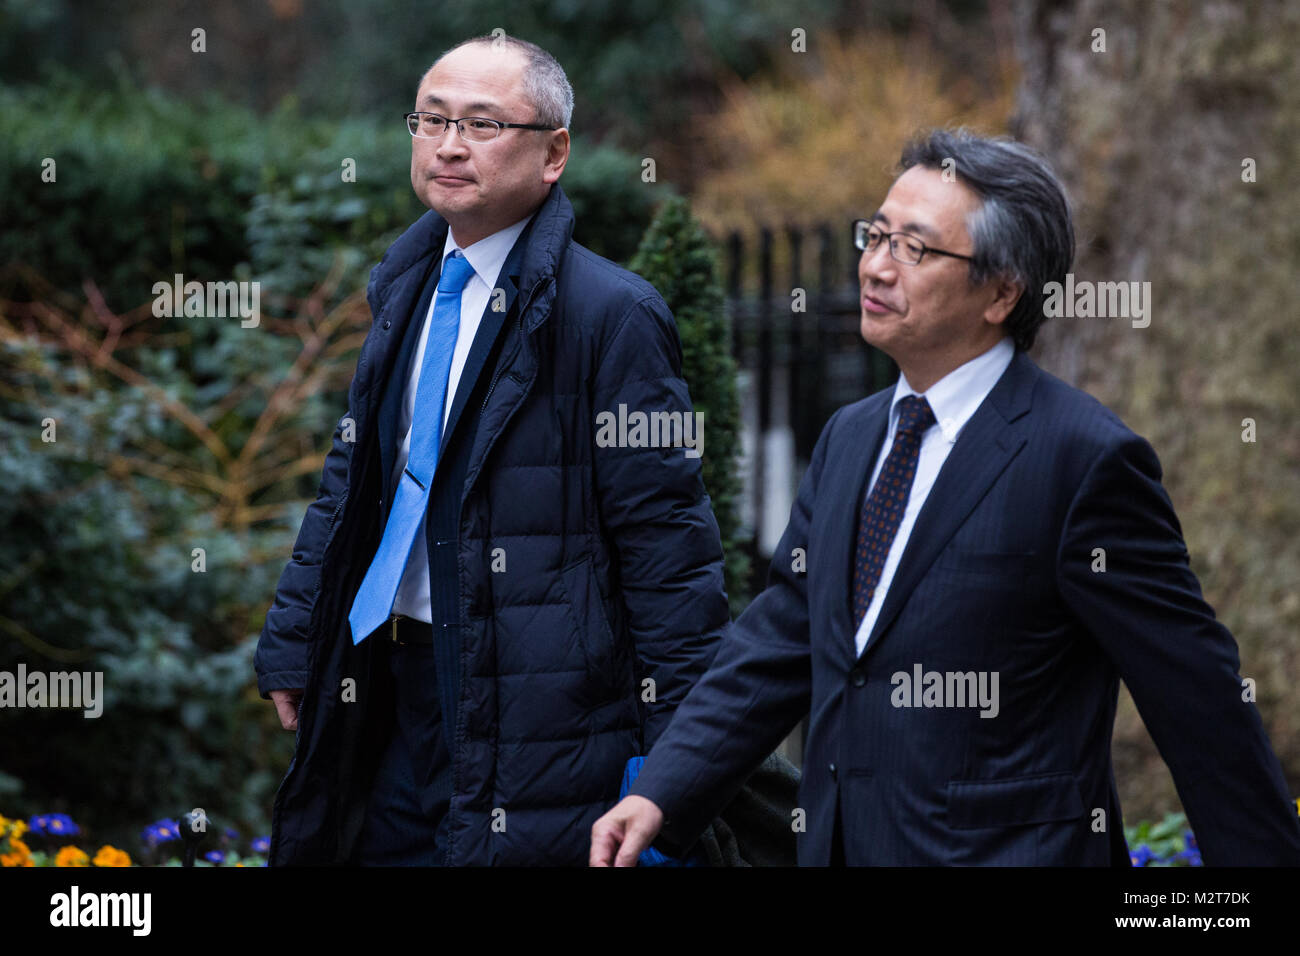 London, UK. 8th February, 2018. Kazuo Okamoto, Chief Executive of Mitsubishi Heavy Industries, and Ken Sakai, Managing Director of KDDI Europe, arrive to attend talks hosted by Prime Minister Theresa May, Chancellor of the Exchequer Philip Hammond, Secretary of State for International Trade Liam Fox and Secretary of State for Business, Energy and Industrial Strategy Greg Clark Credit: Mark Kerrison/Alamy Live News Stock Photo